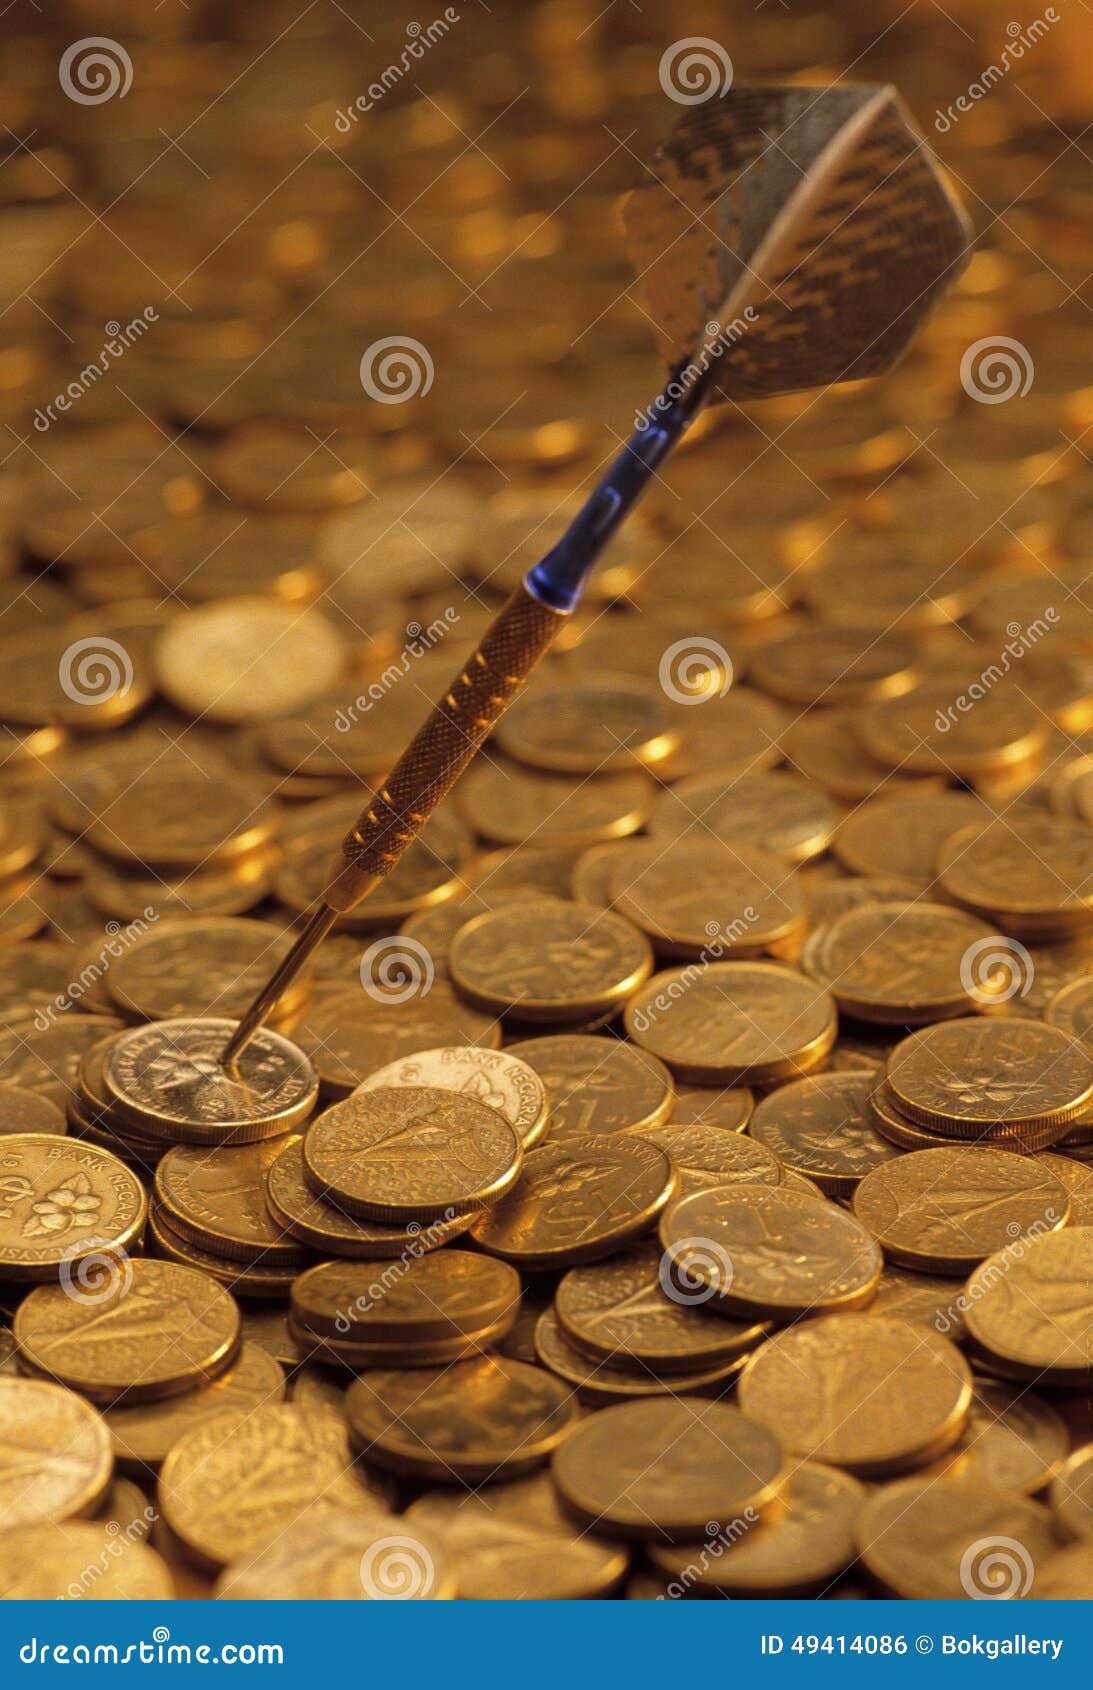 darts on a heaped of gold coins